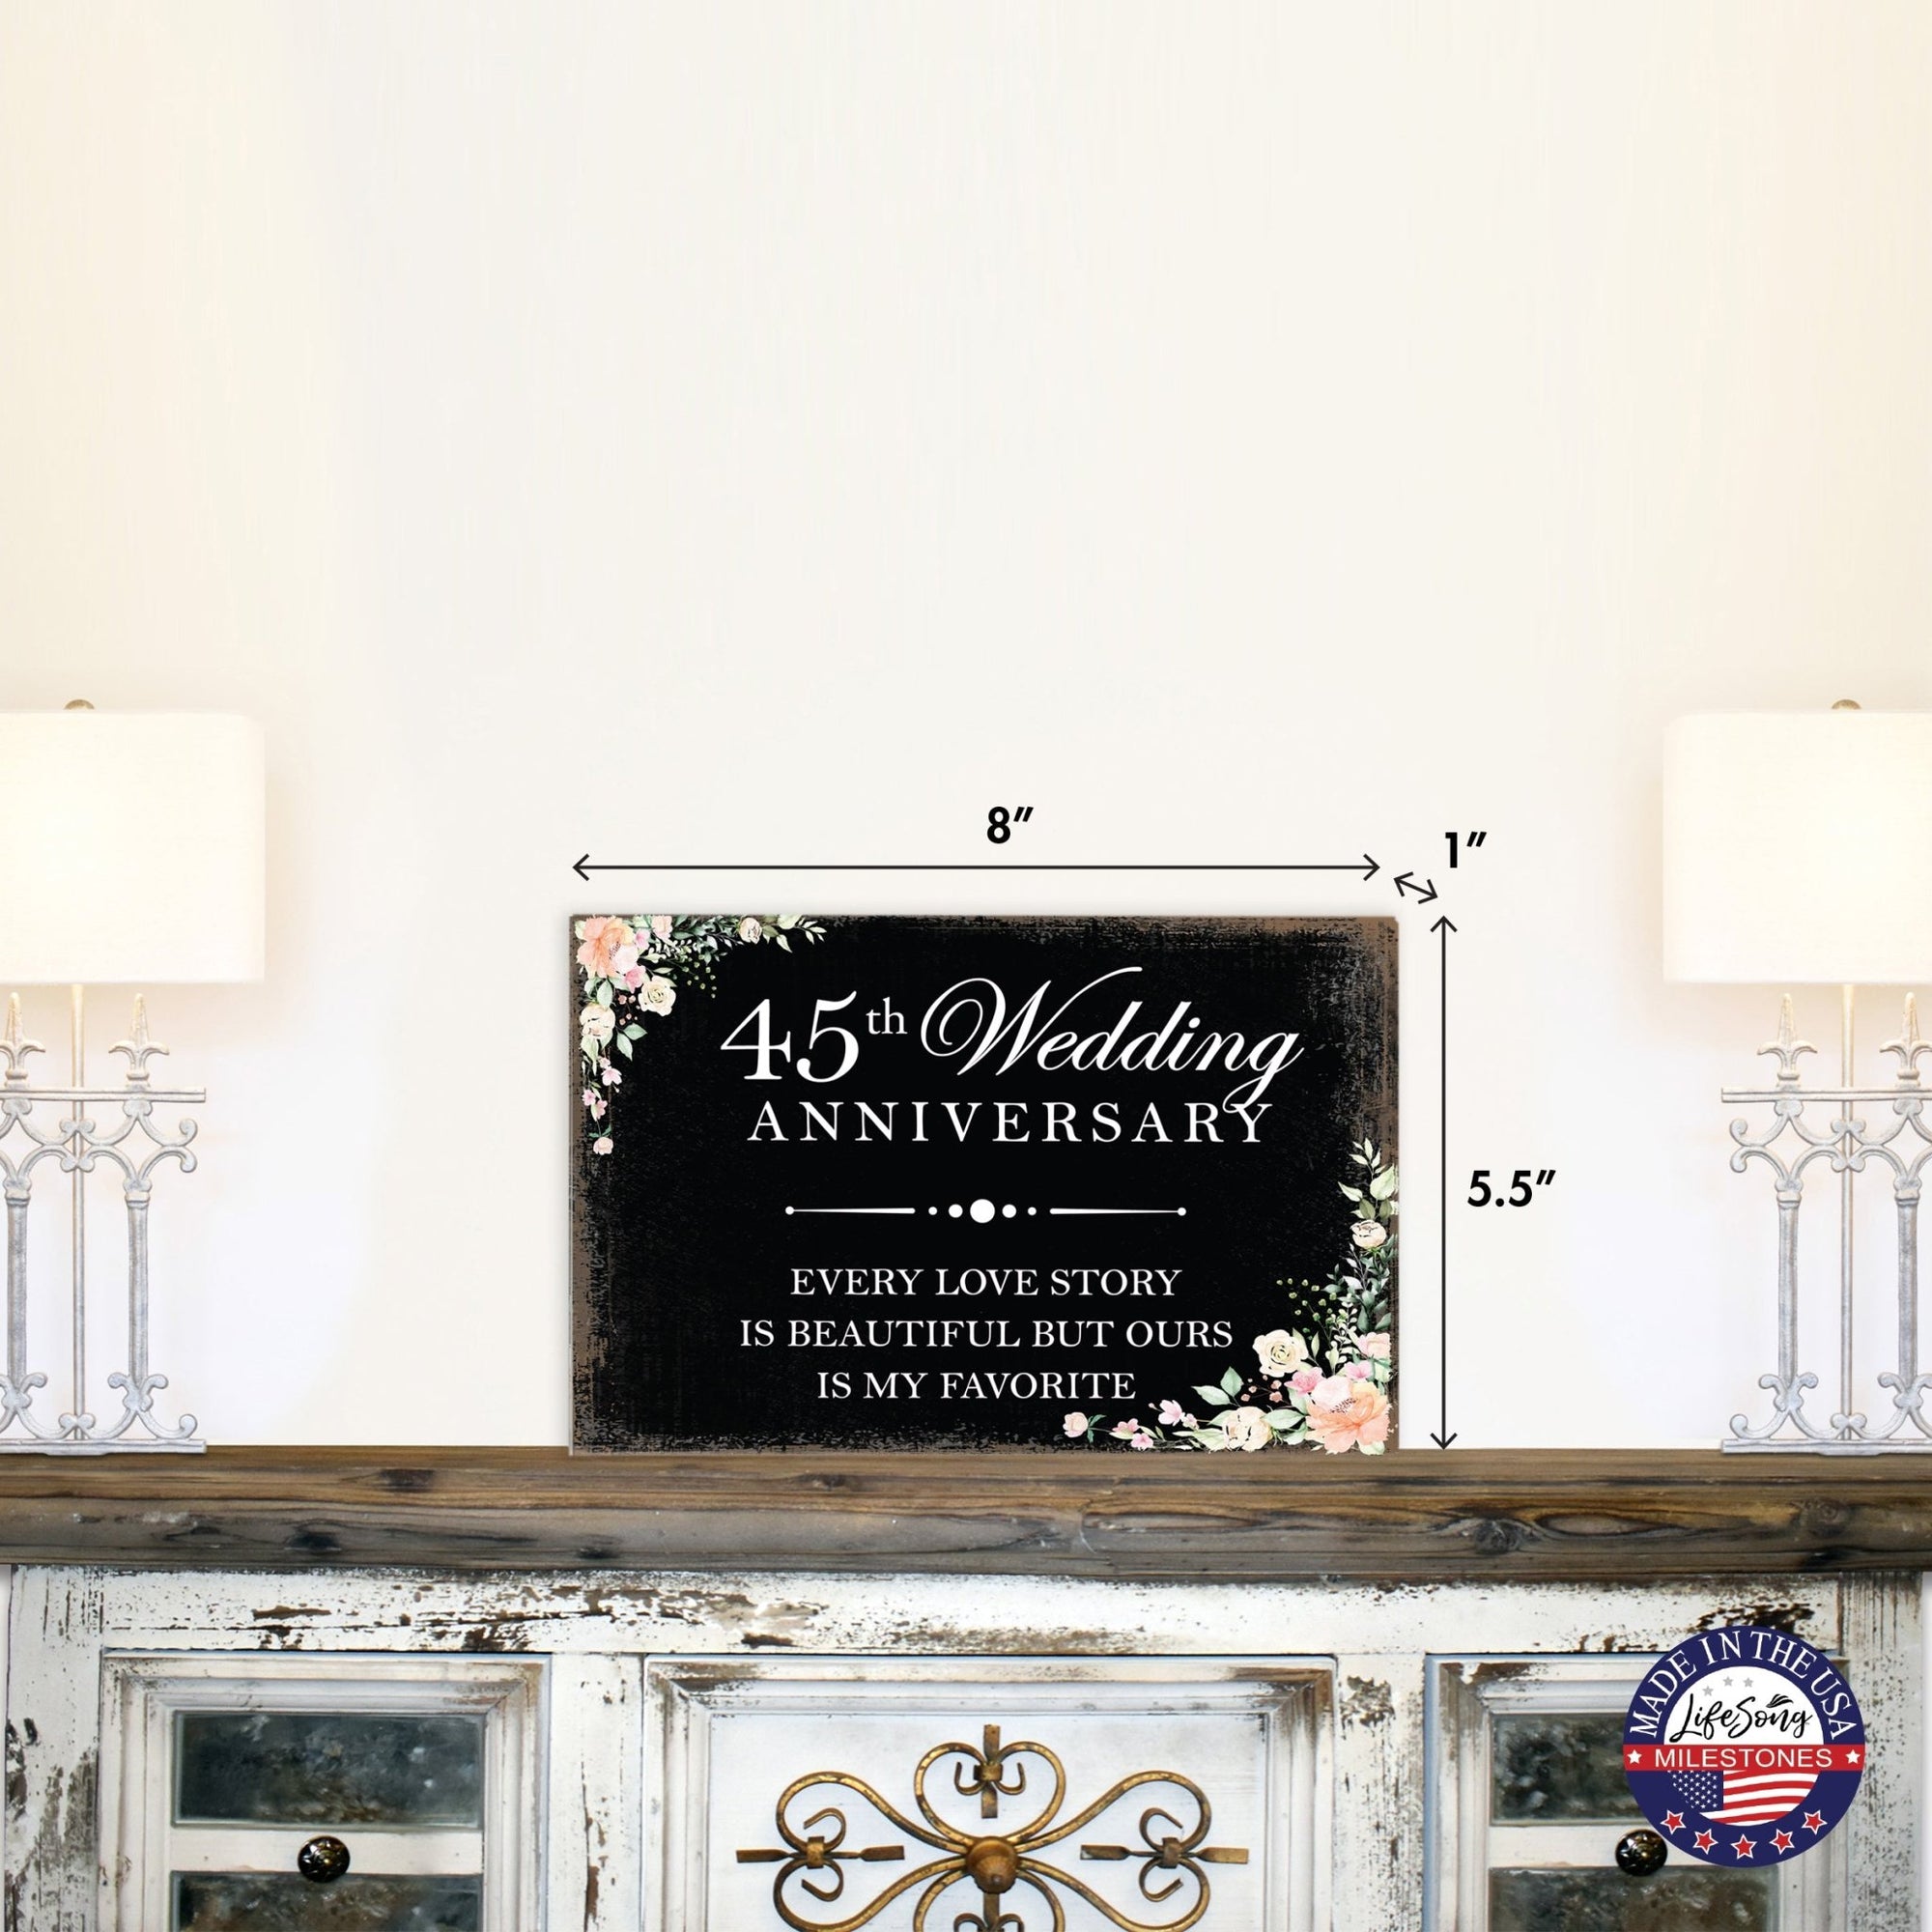 45th Wedding Anniversary Unique Shelf Decor and Tabletop Signs Gift for Couples - Every Love Story - LifeSong Milestones